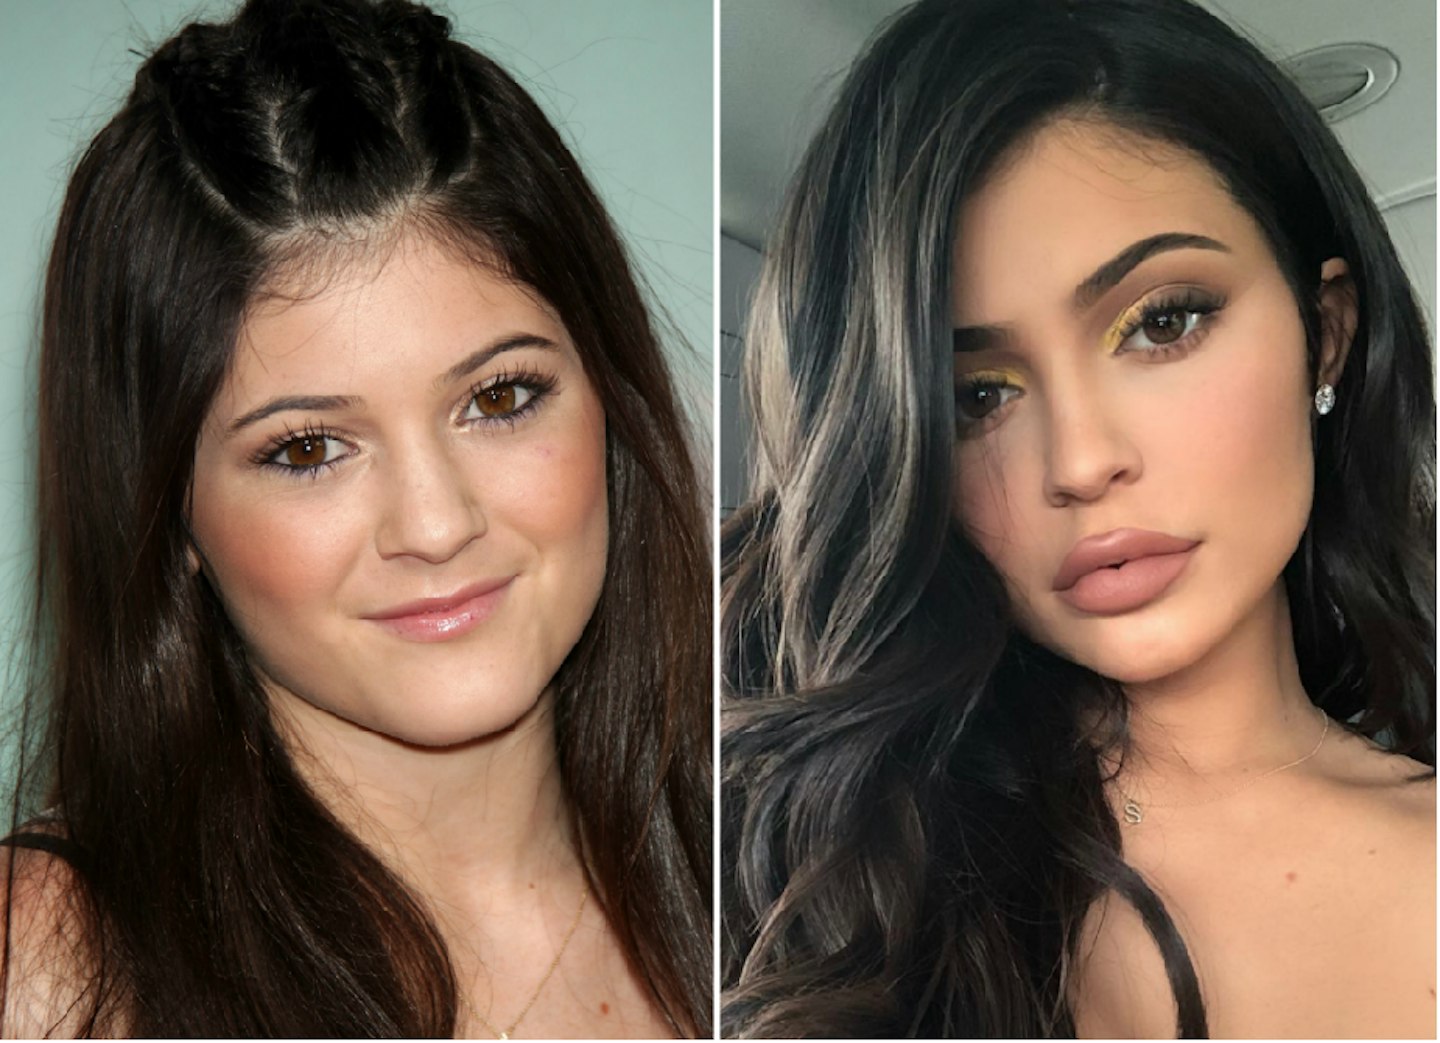 Kylie Jenner before and after plastic surgery